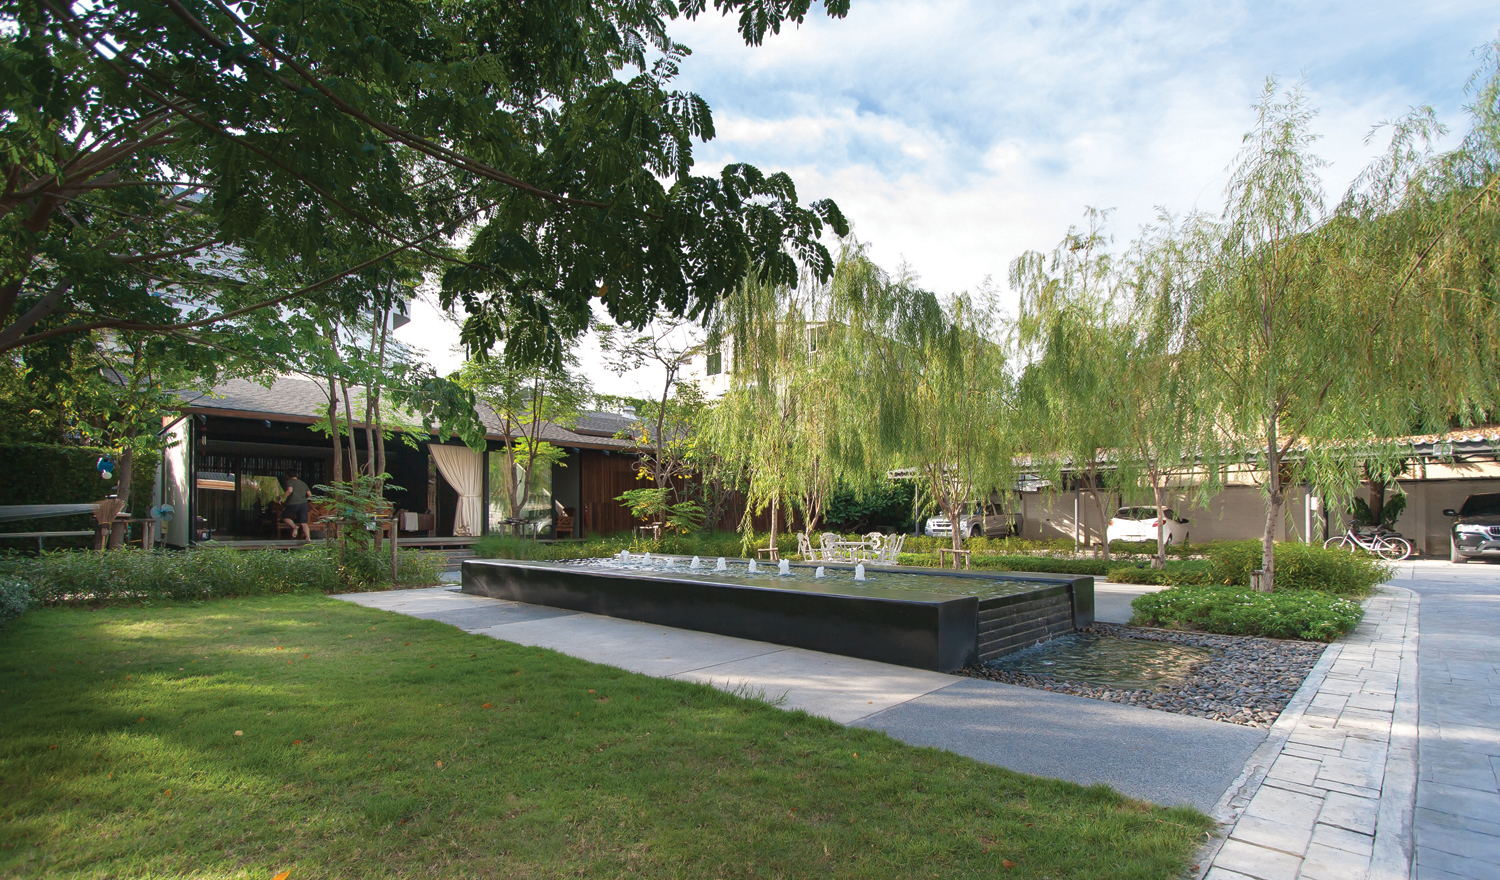 Oer-areemitr’s garden and pavilion by Integrated Field, Image courtesy of Integrated Field